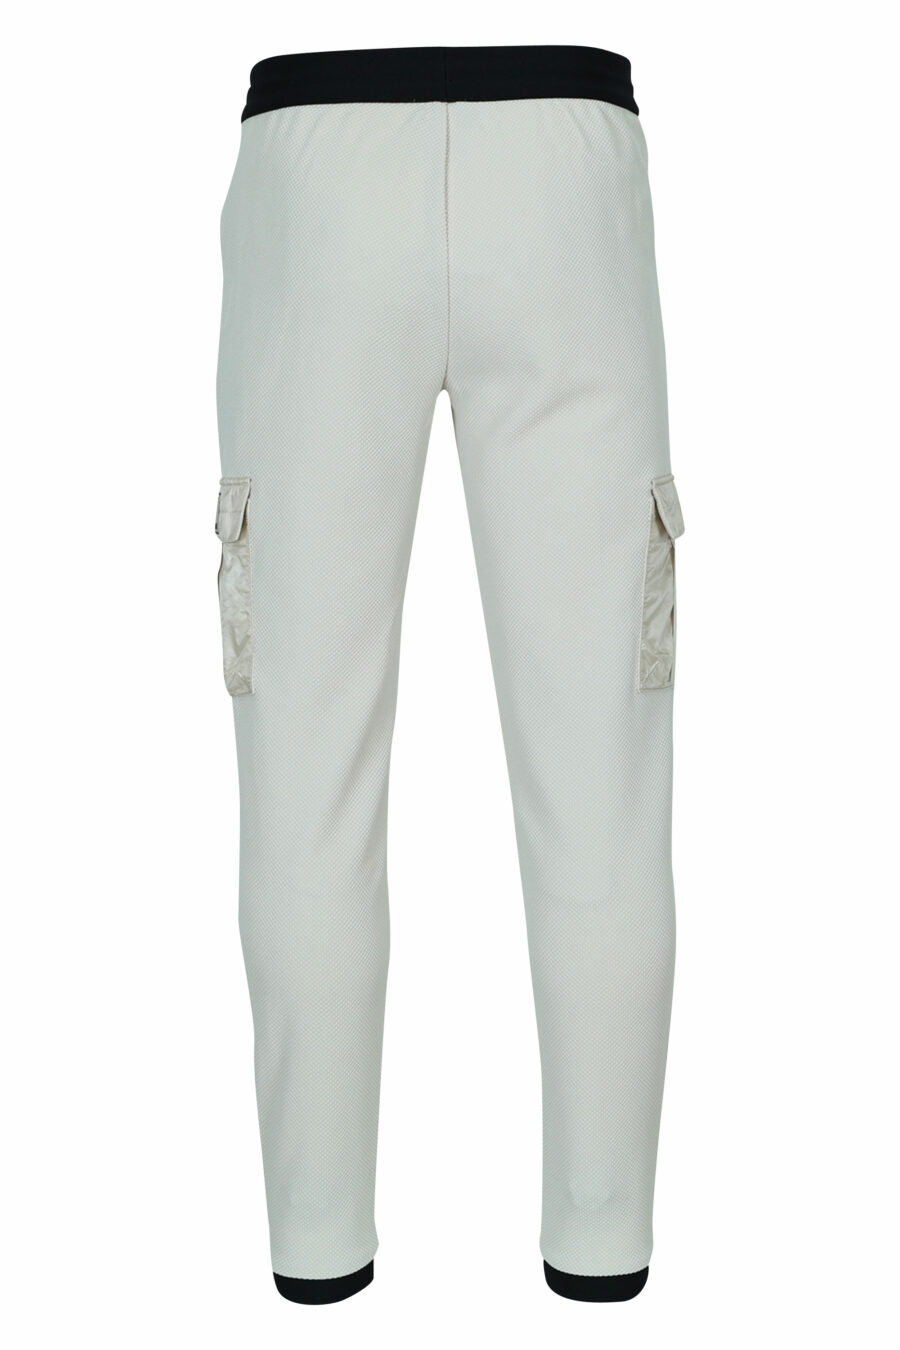 Tracksuit bottoms beige mix cargo style and mini-logo "lux identity" - 8057970665359 1